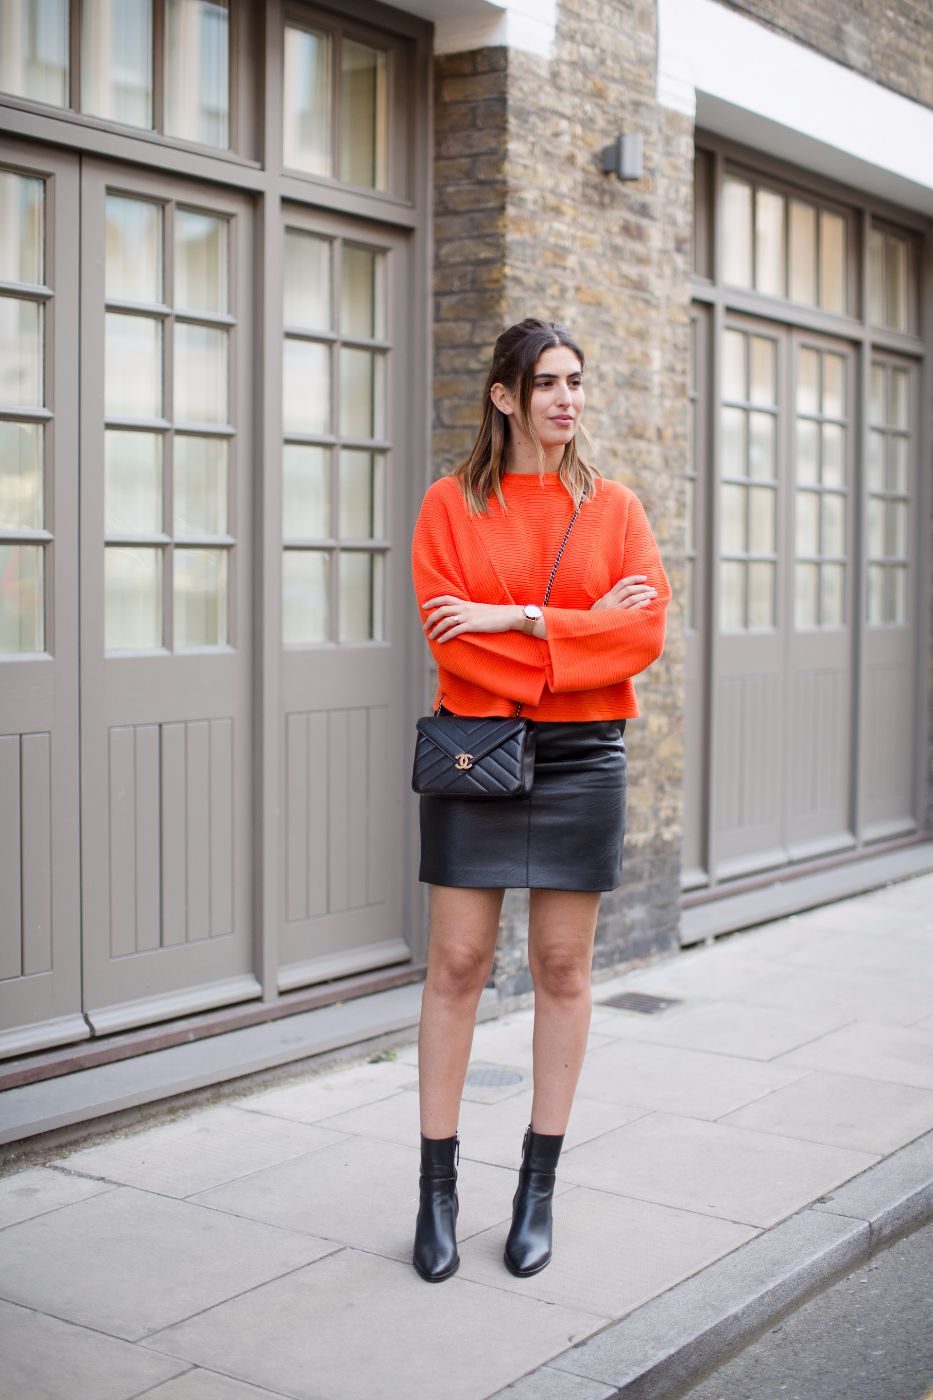 lily-pebbles-styling-leather-skirt-3-ways-video-fashion-march-2017-25